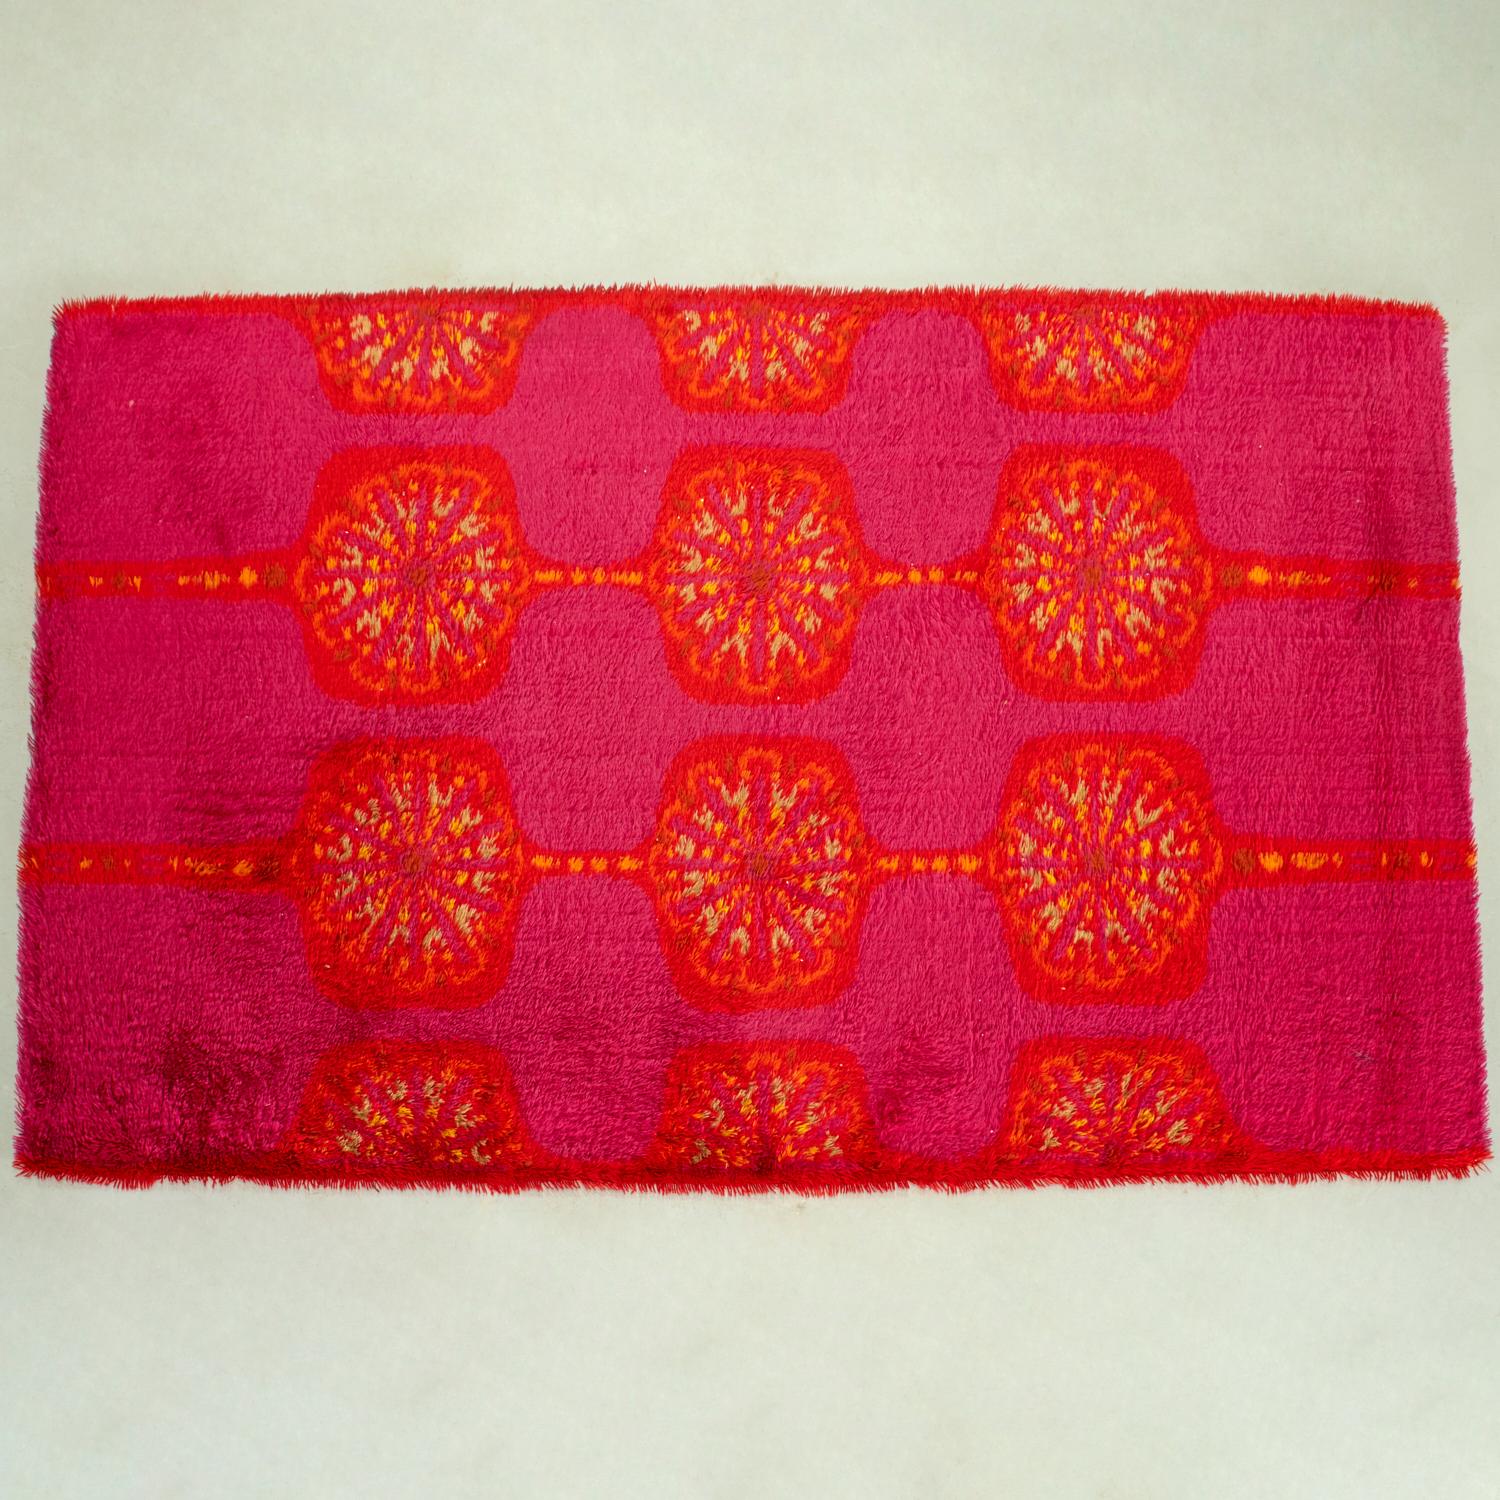 Wool Modernist Rya Shag Carpet, Stylized Red and Orange Florals on a Fuchsia Ground For Sale